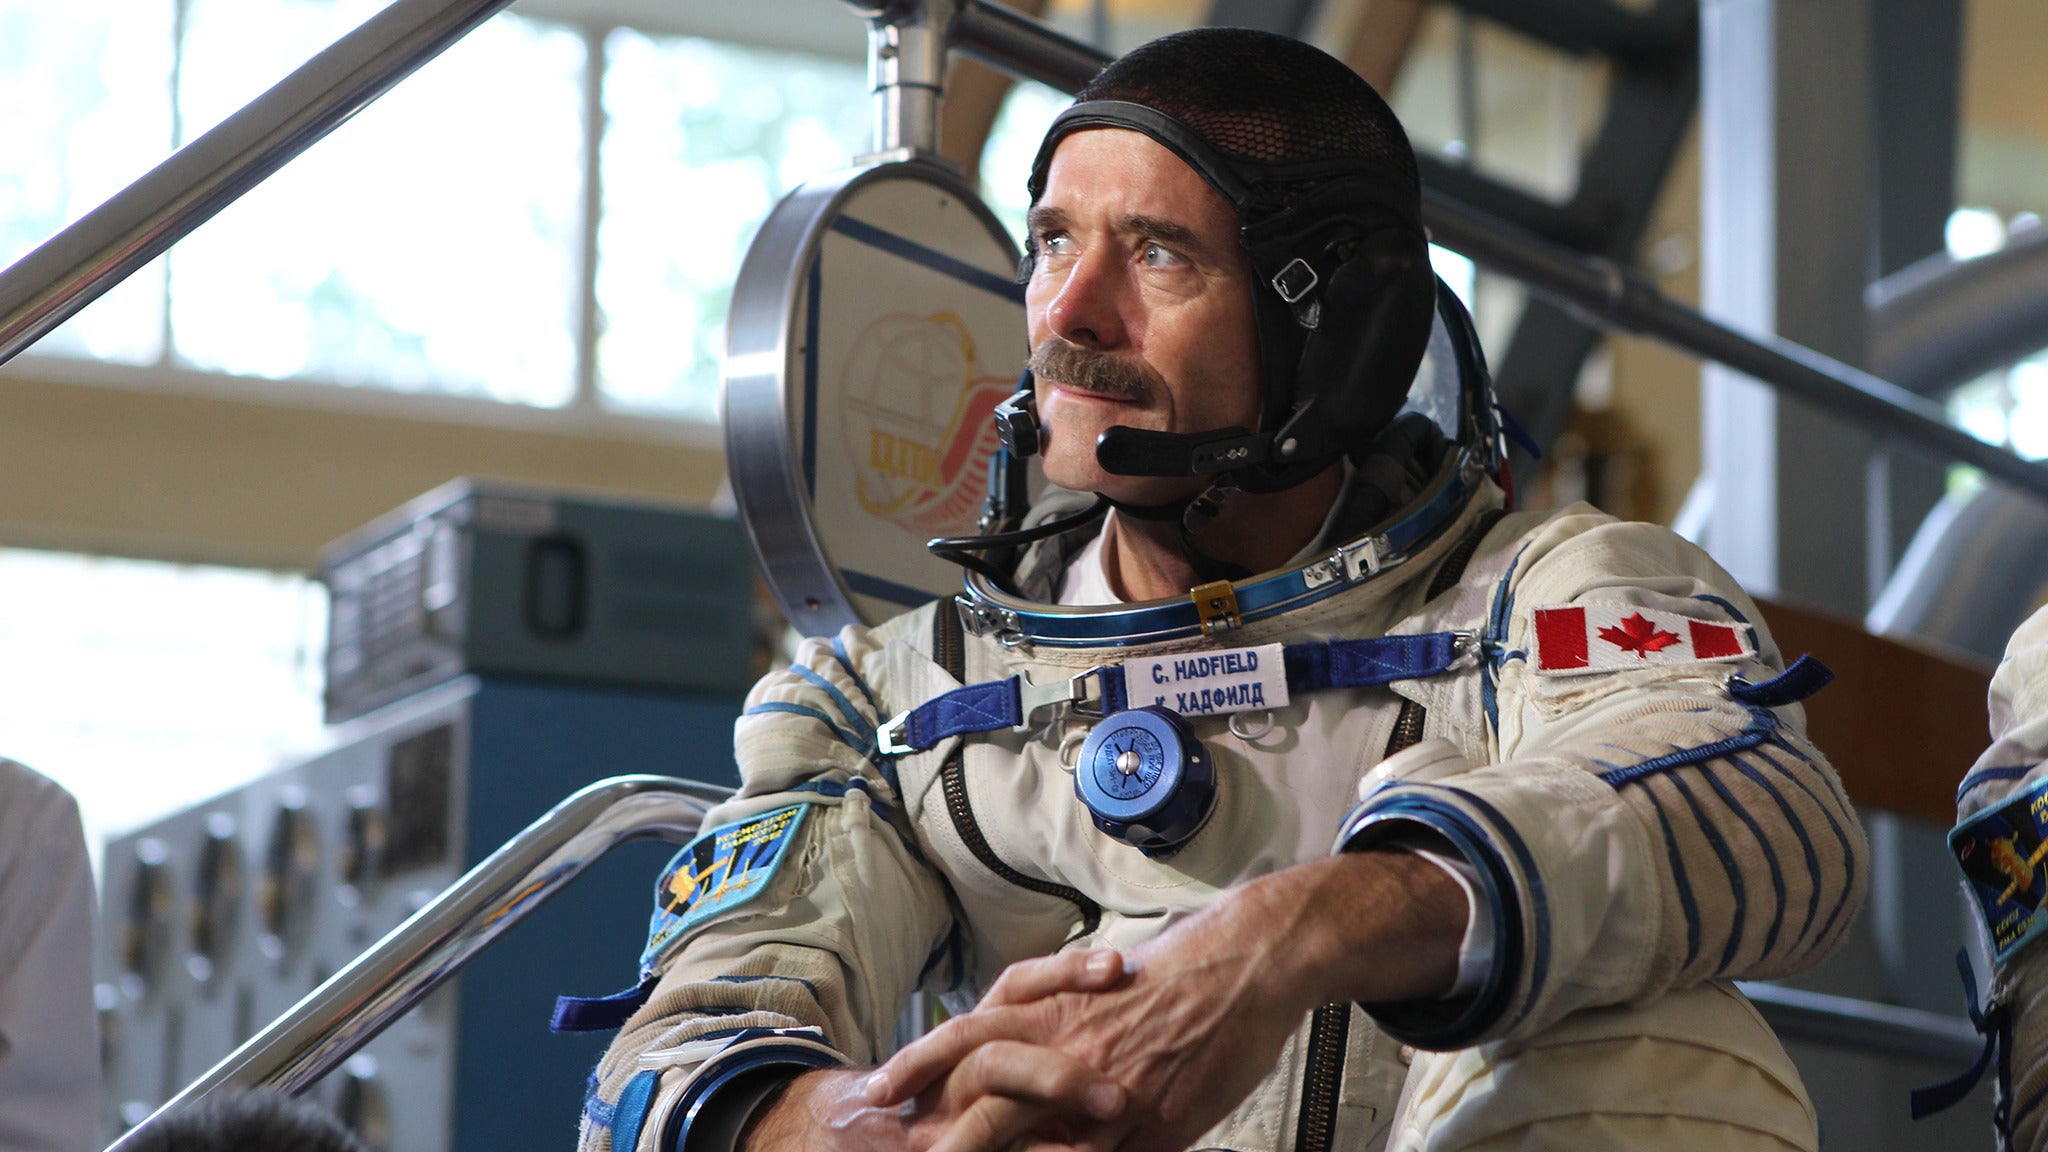 Chris Hadfield Presents Exploration: Where We're Going Next in Hamilton promo photo for Live Nation Mobile App presale offer code